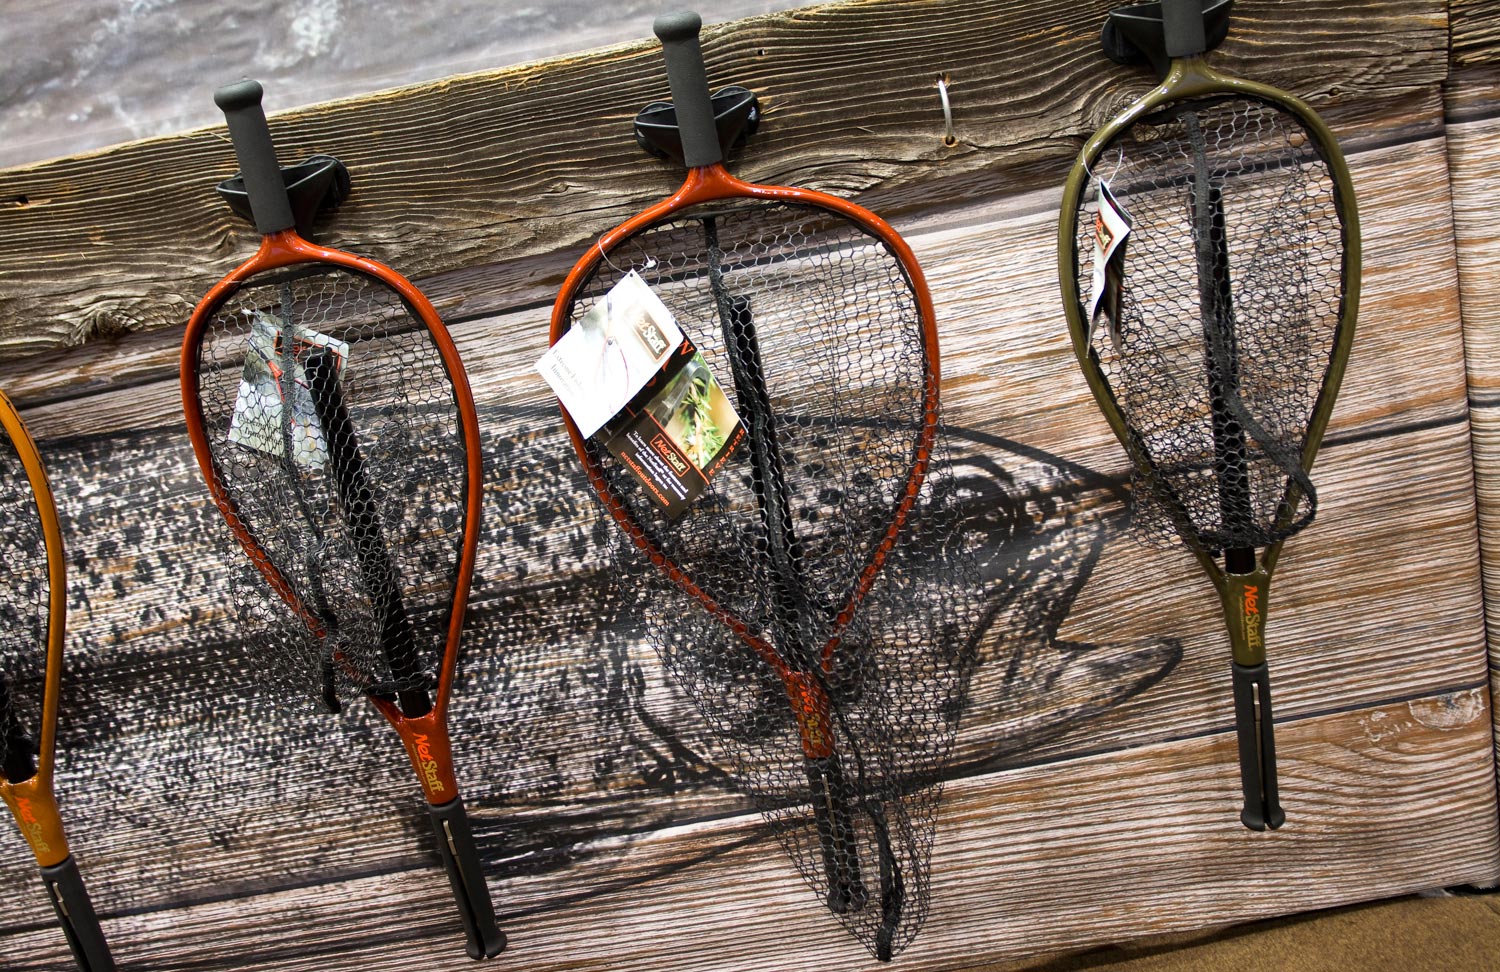 fly fishing gear 2014 - Fly Fishing, Gink and Gasoline